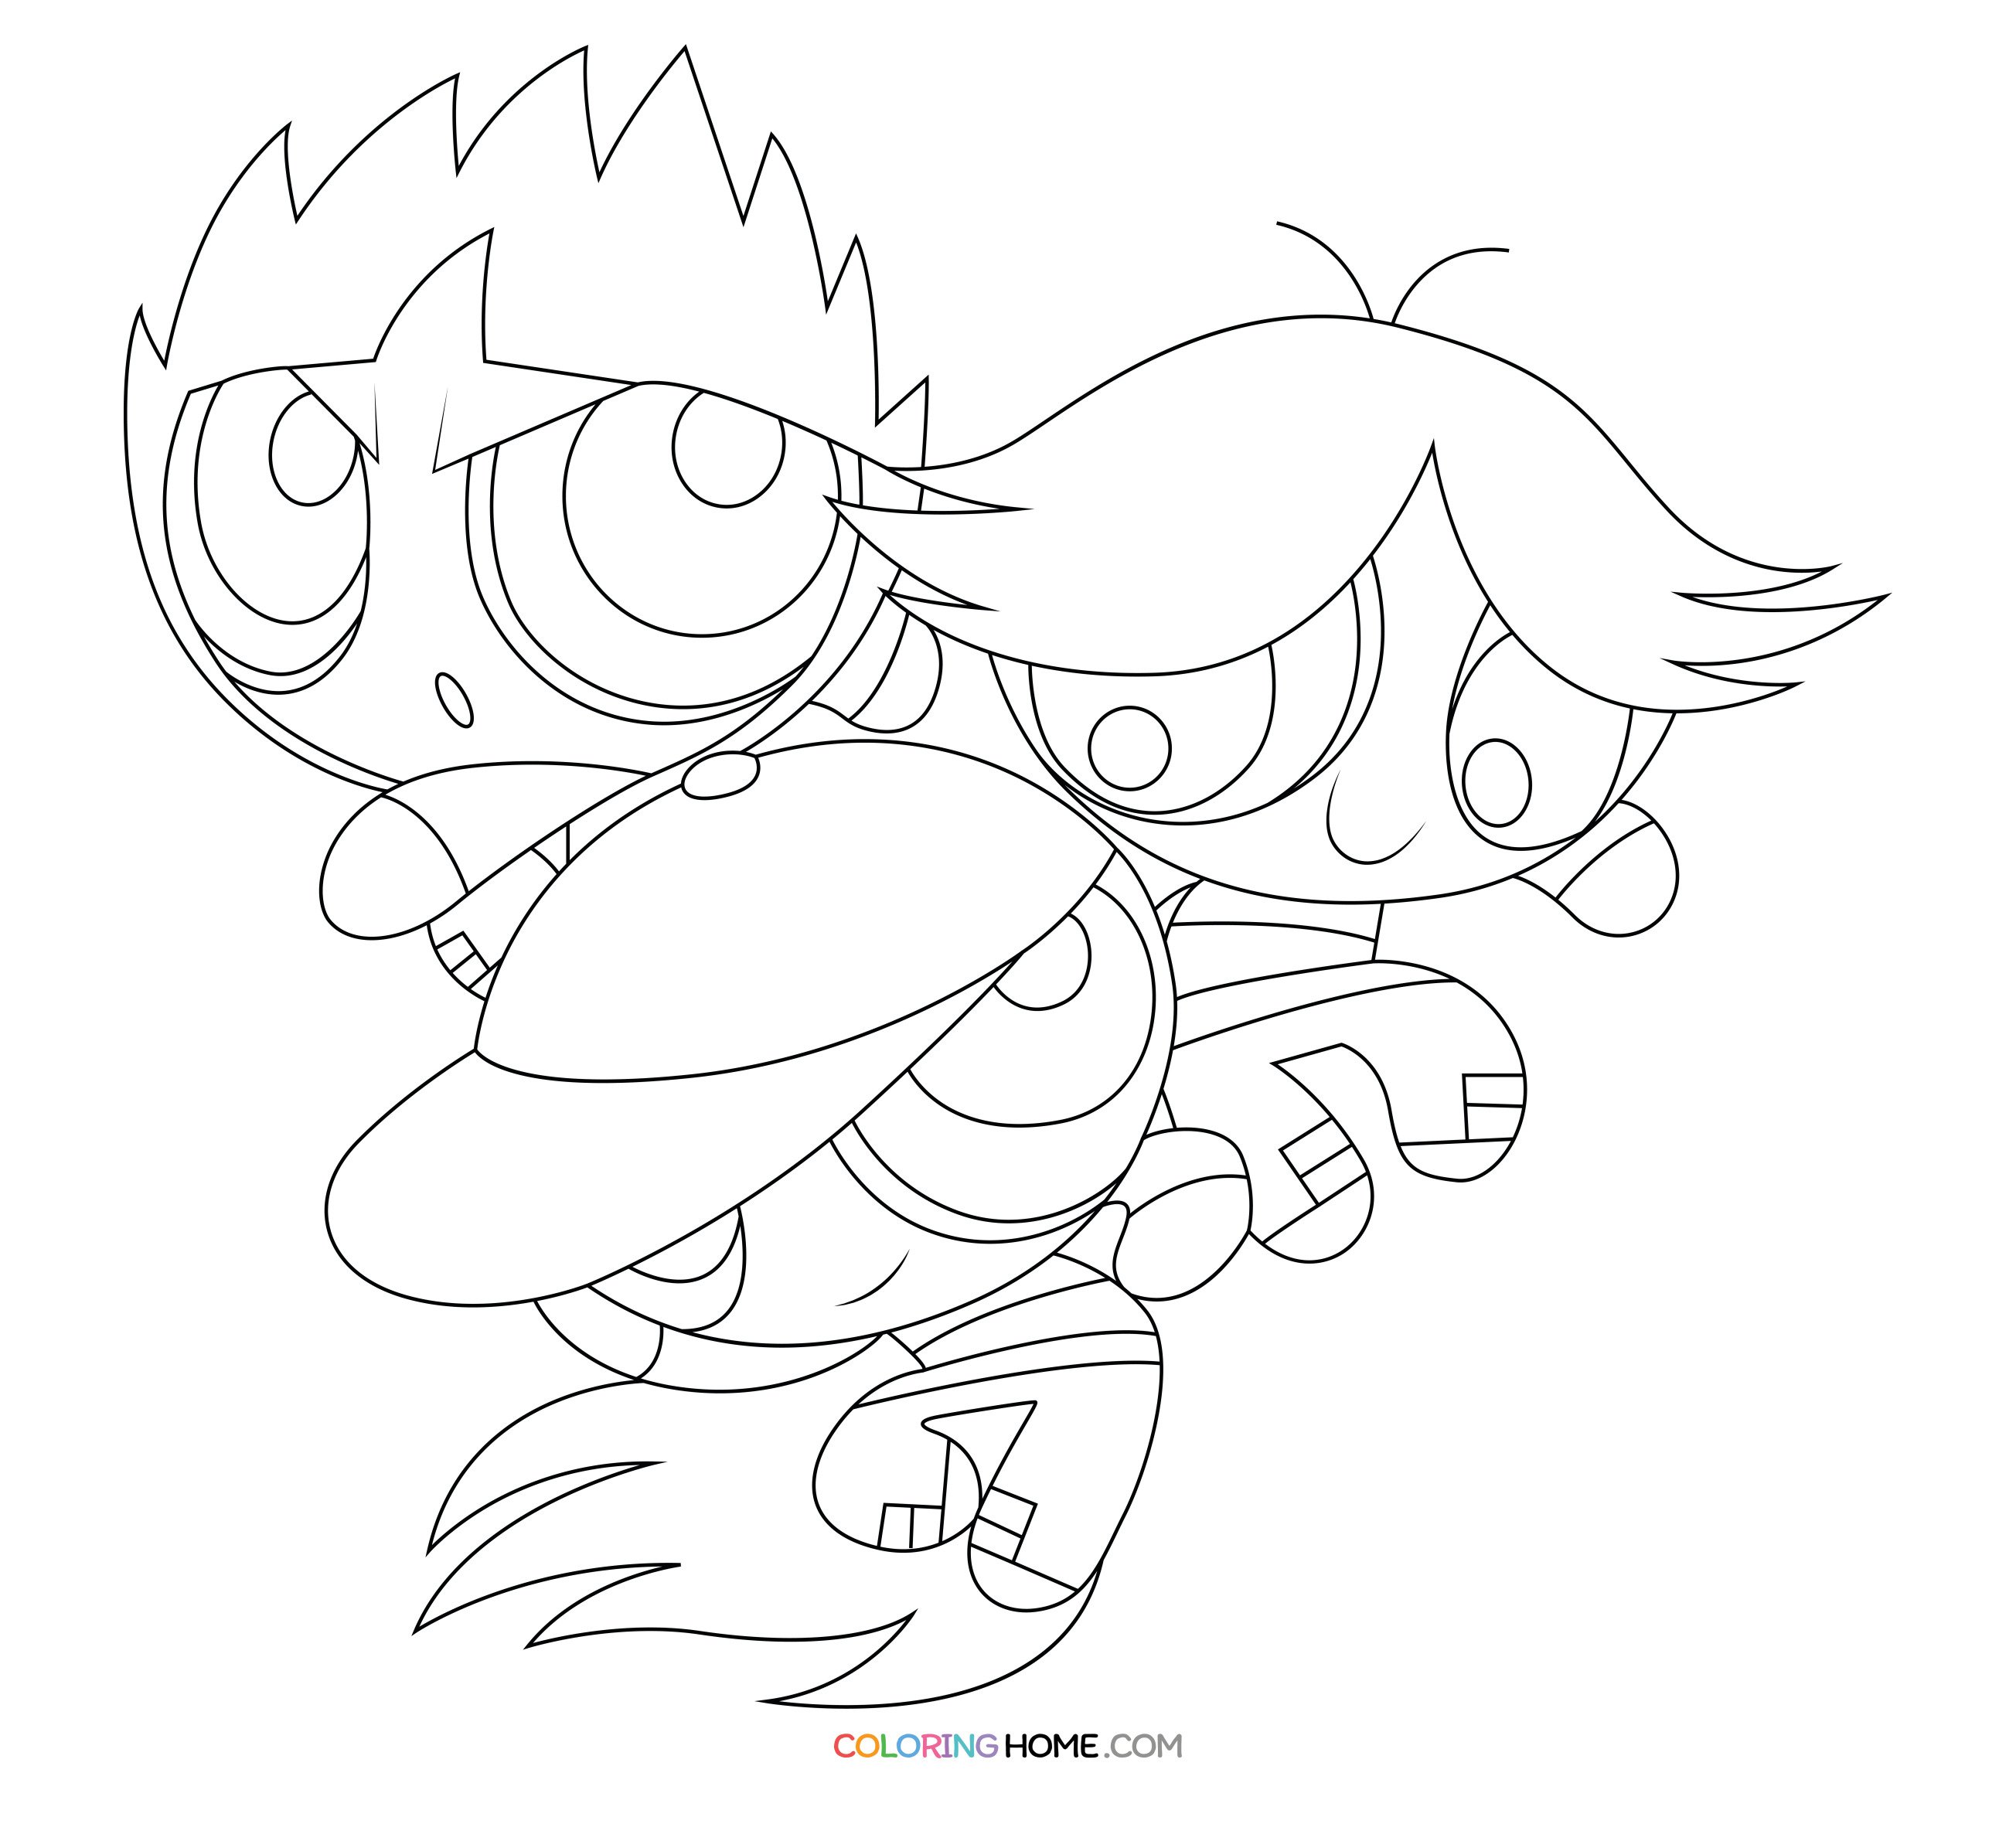 The Rowdyruff Boys coloring page